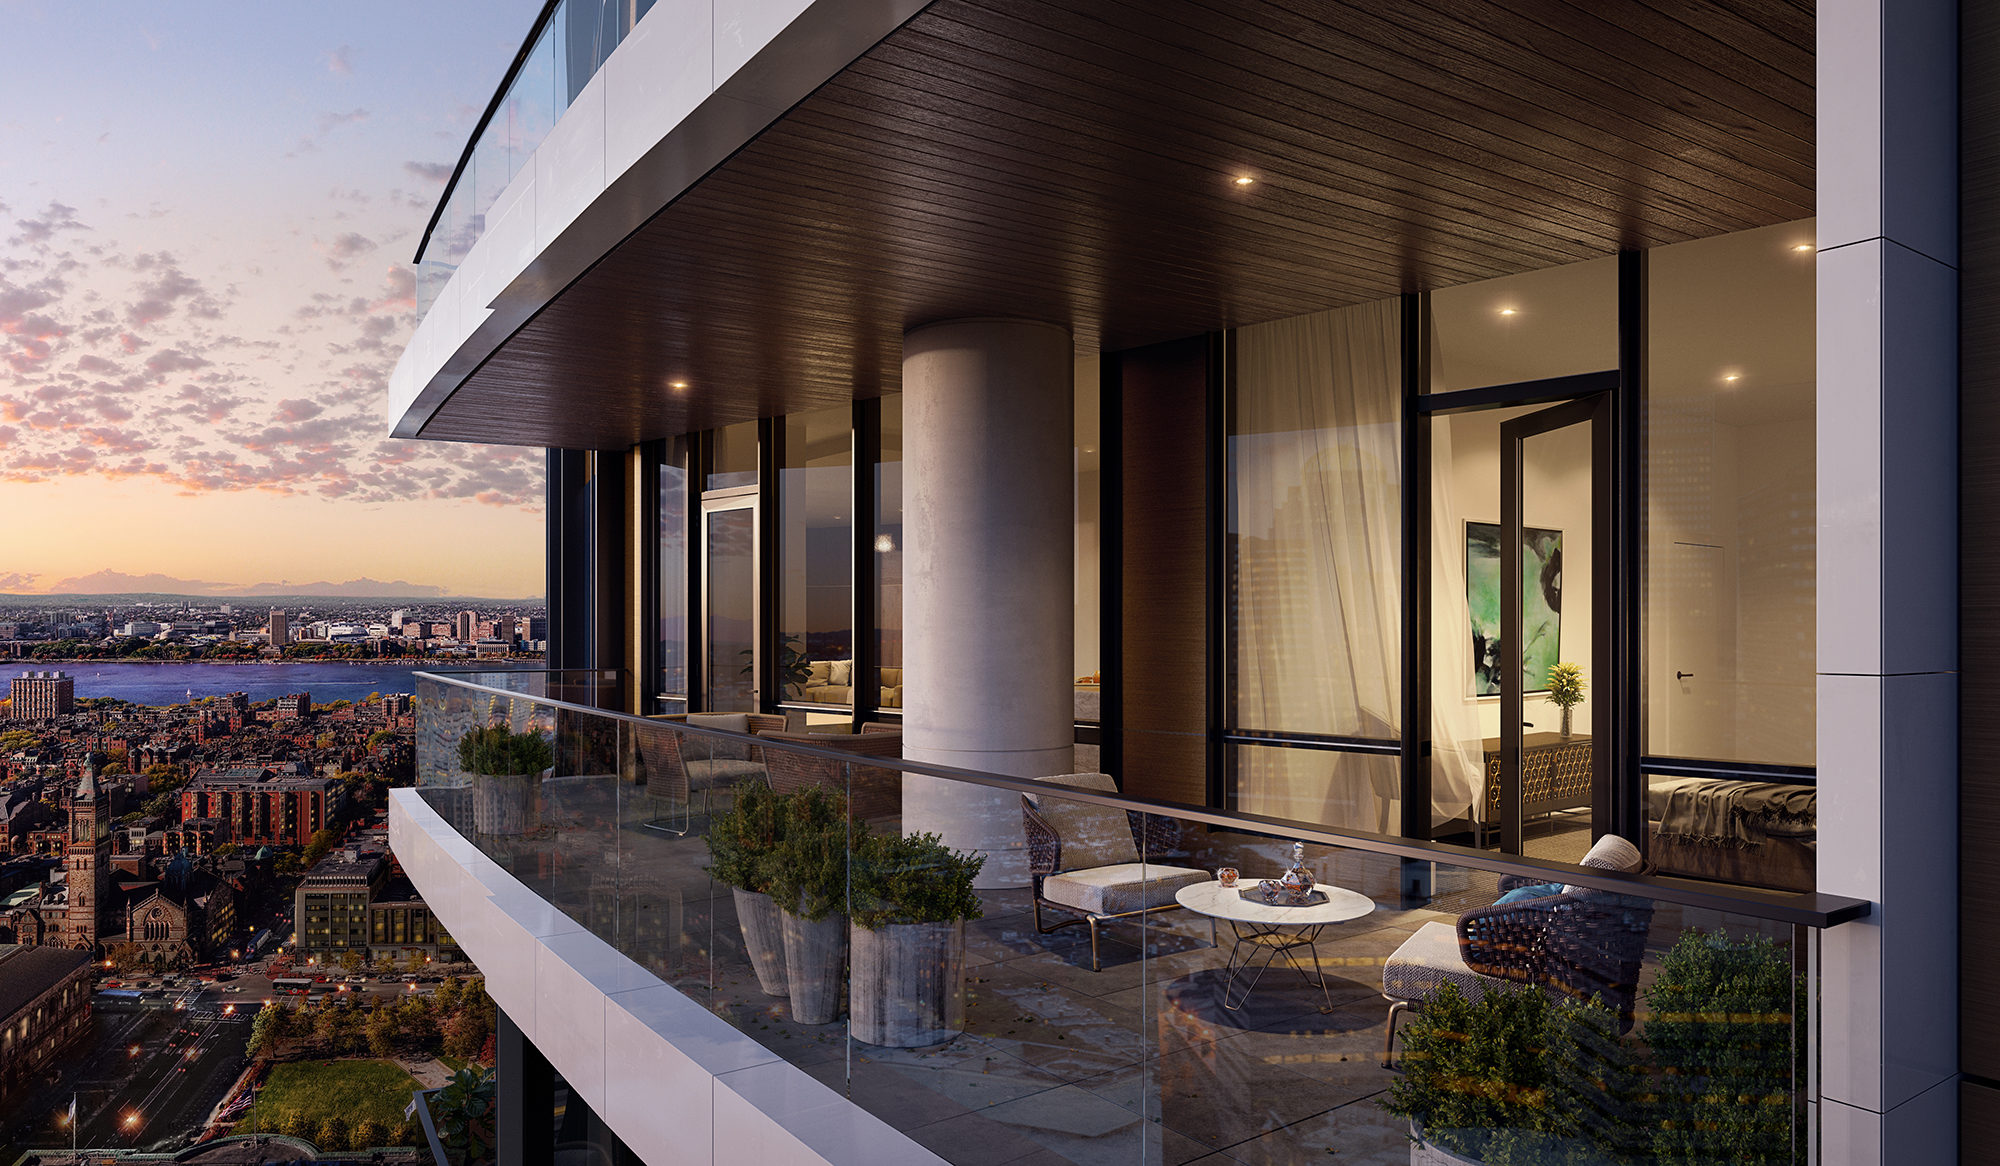 Raffles Boston Back Bay Hotel & Residences, Residences Exterior – Rendering Credit: The Architectural Team, Inc.